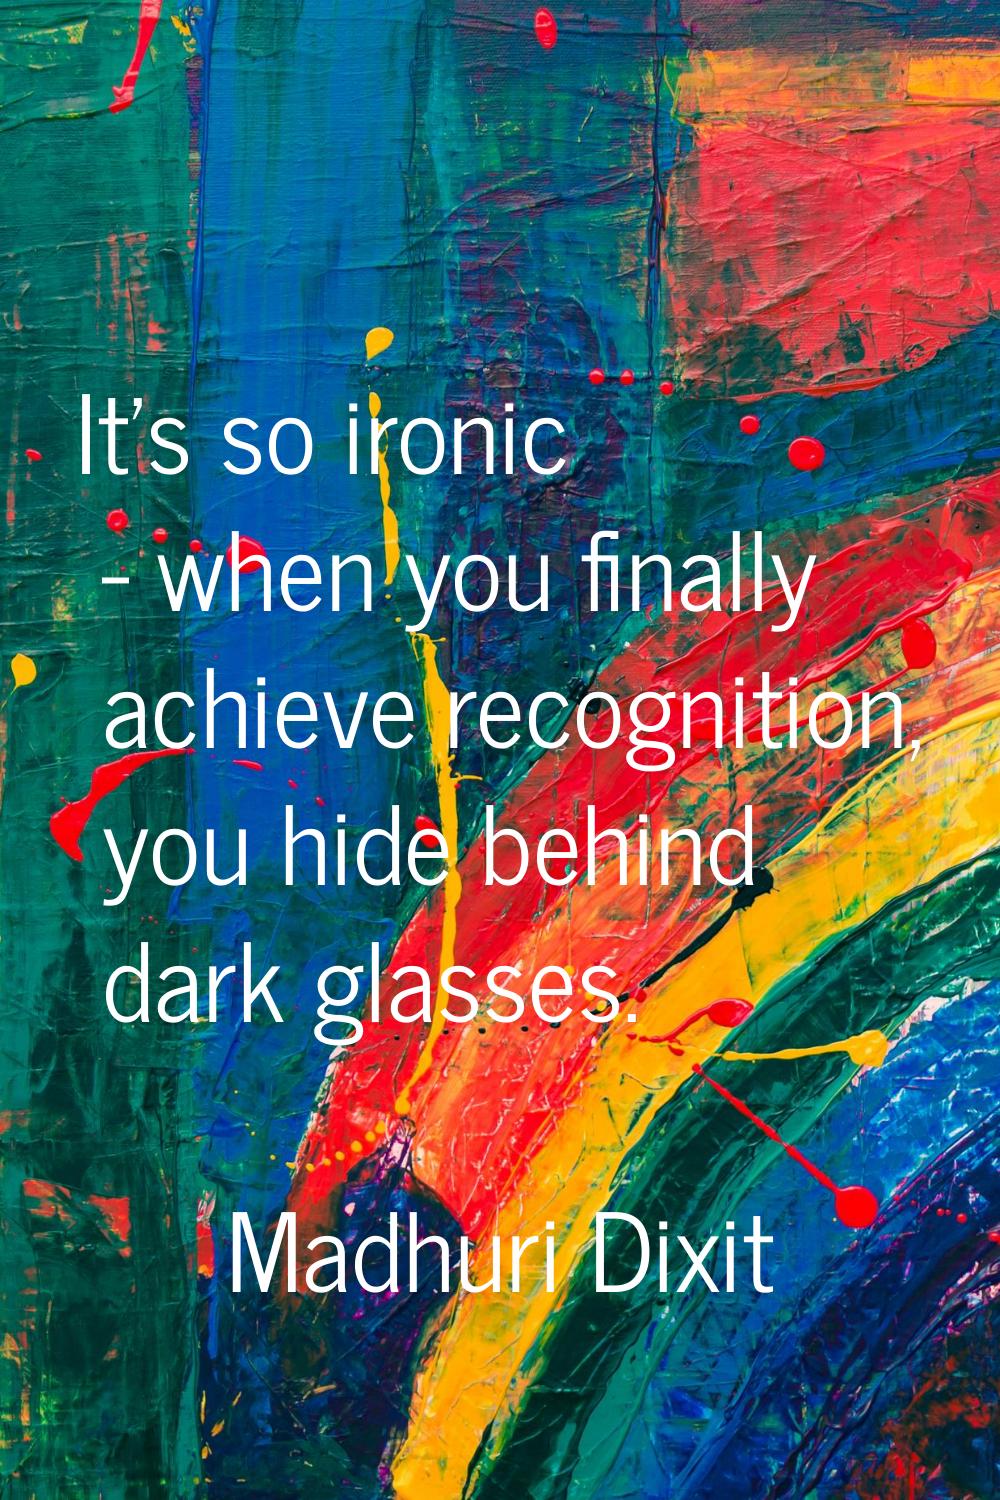 It's so ironic - when you finally achieve recognition, you hide behind dark glasses.